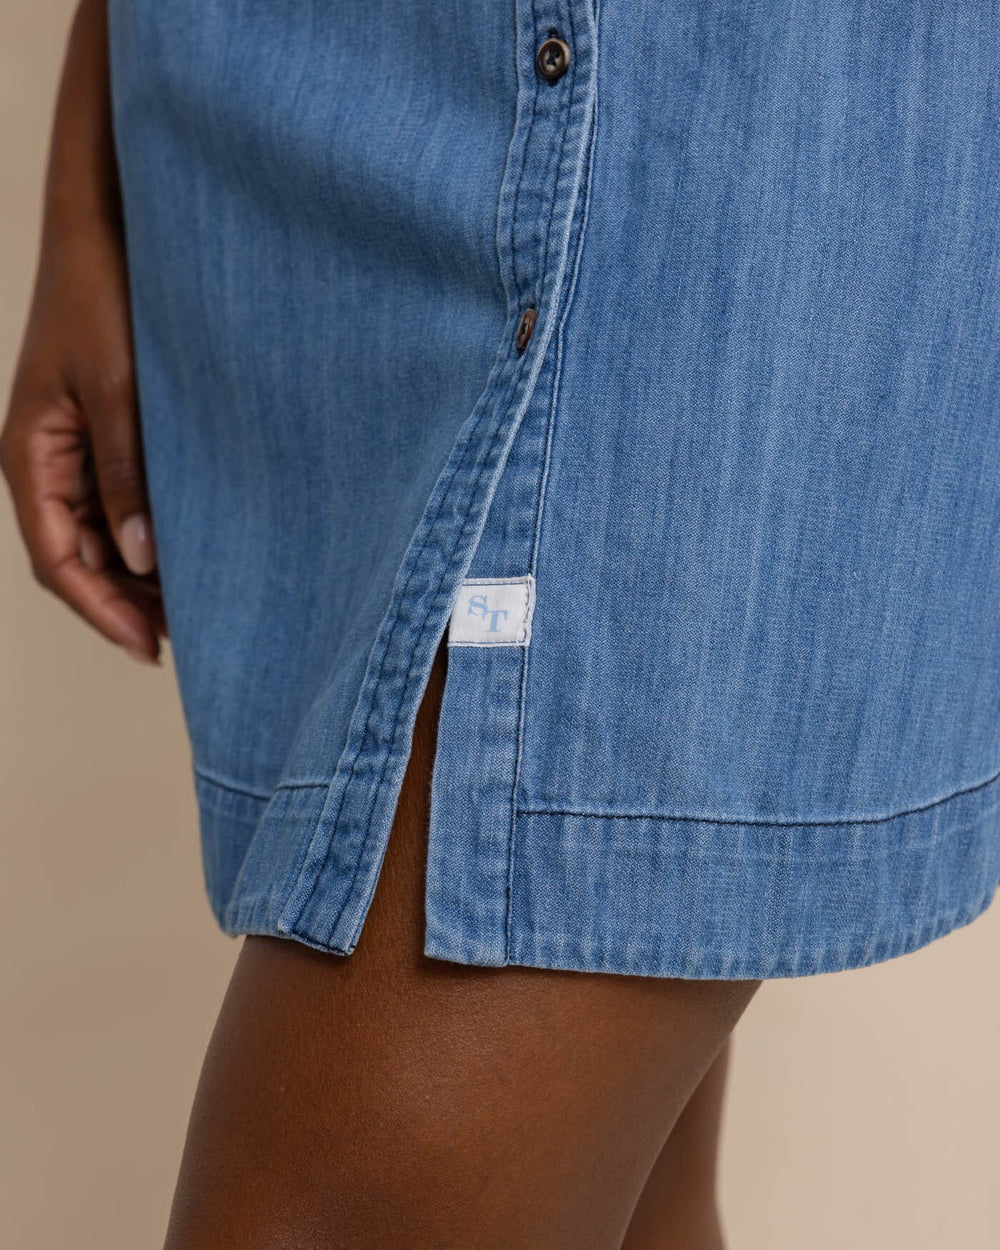 The detail view of the Southern Tide Cam Denim Dress by Southern Tide - Medium Wash Indigo